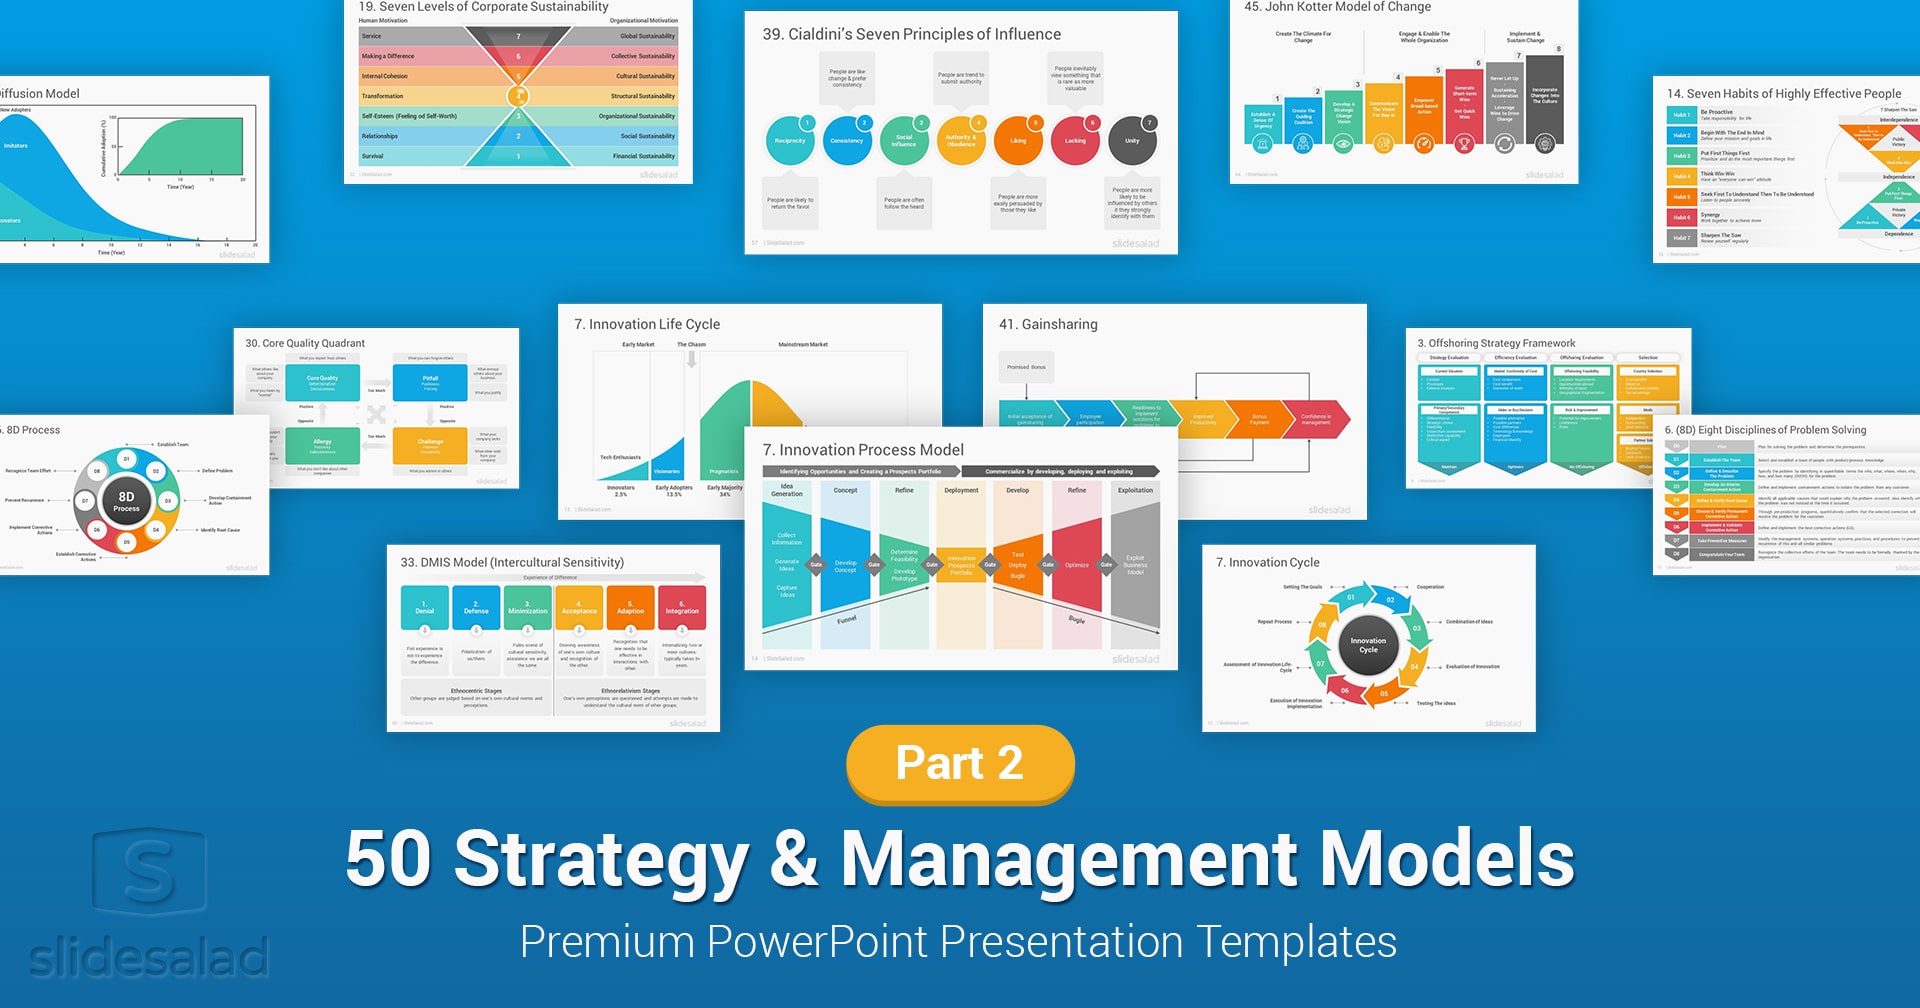 Strategy and Management Models PowerPoint Templates Part 2 - PPT Design Pack PowerPoint Templates for Fresh Presentations